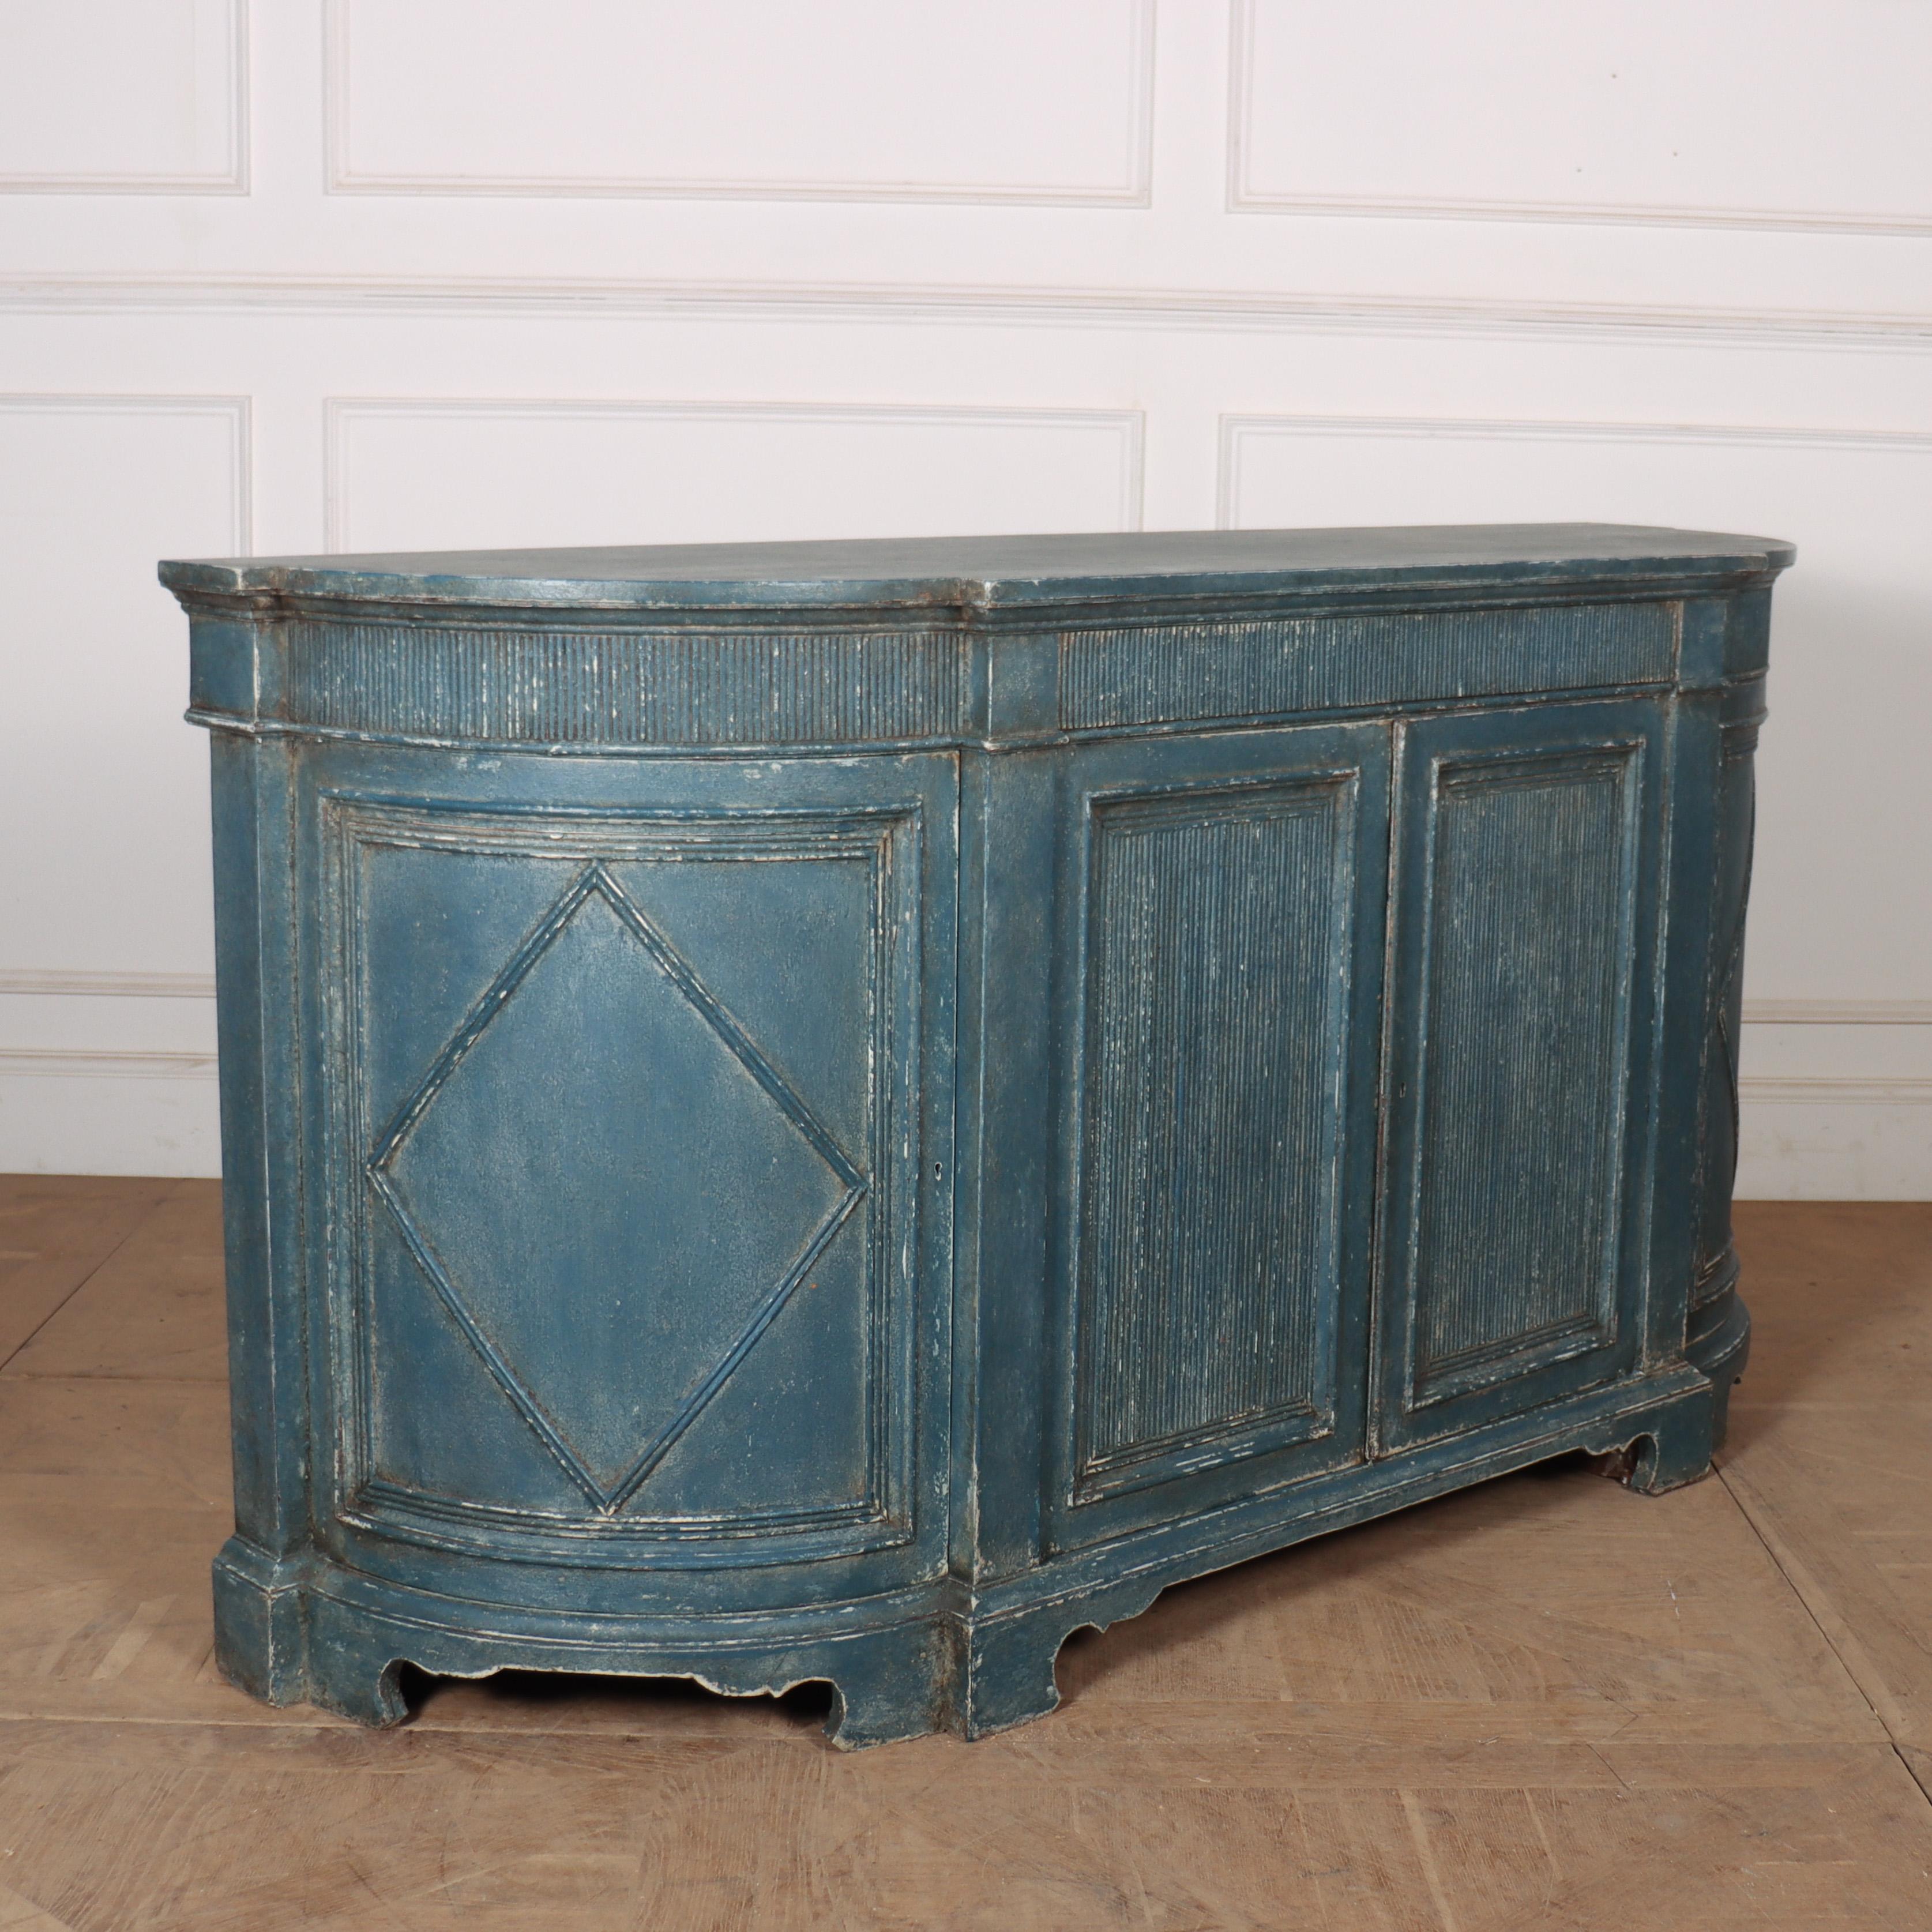 Early 19th C Danish painted pine and oak sideboard with one frieze drawer and cupboard doors below. 1840.

Reference: 8173

Dimensions
72 inches (183 cms) Wide
21.5 inches (55 cms) Deep
37 inches (94 cms) High